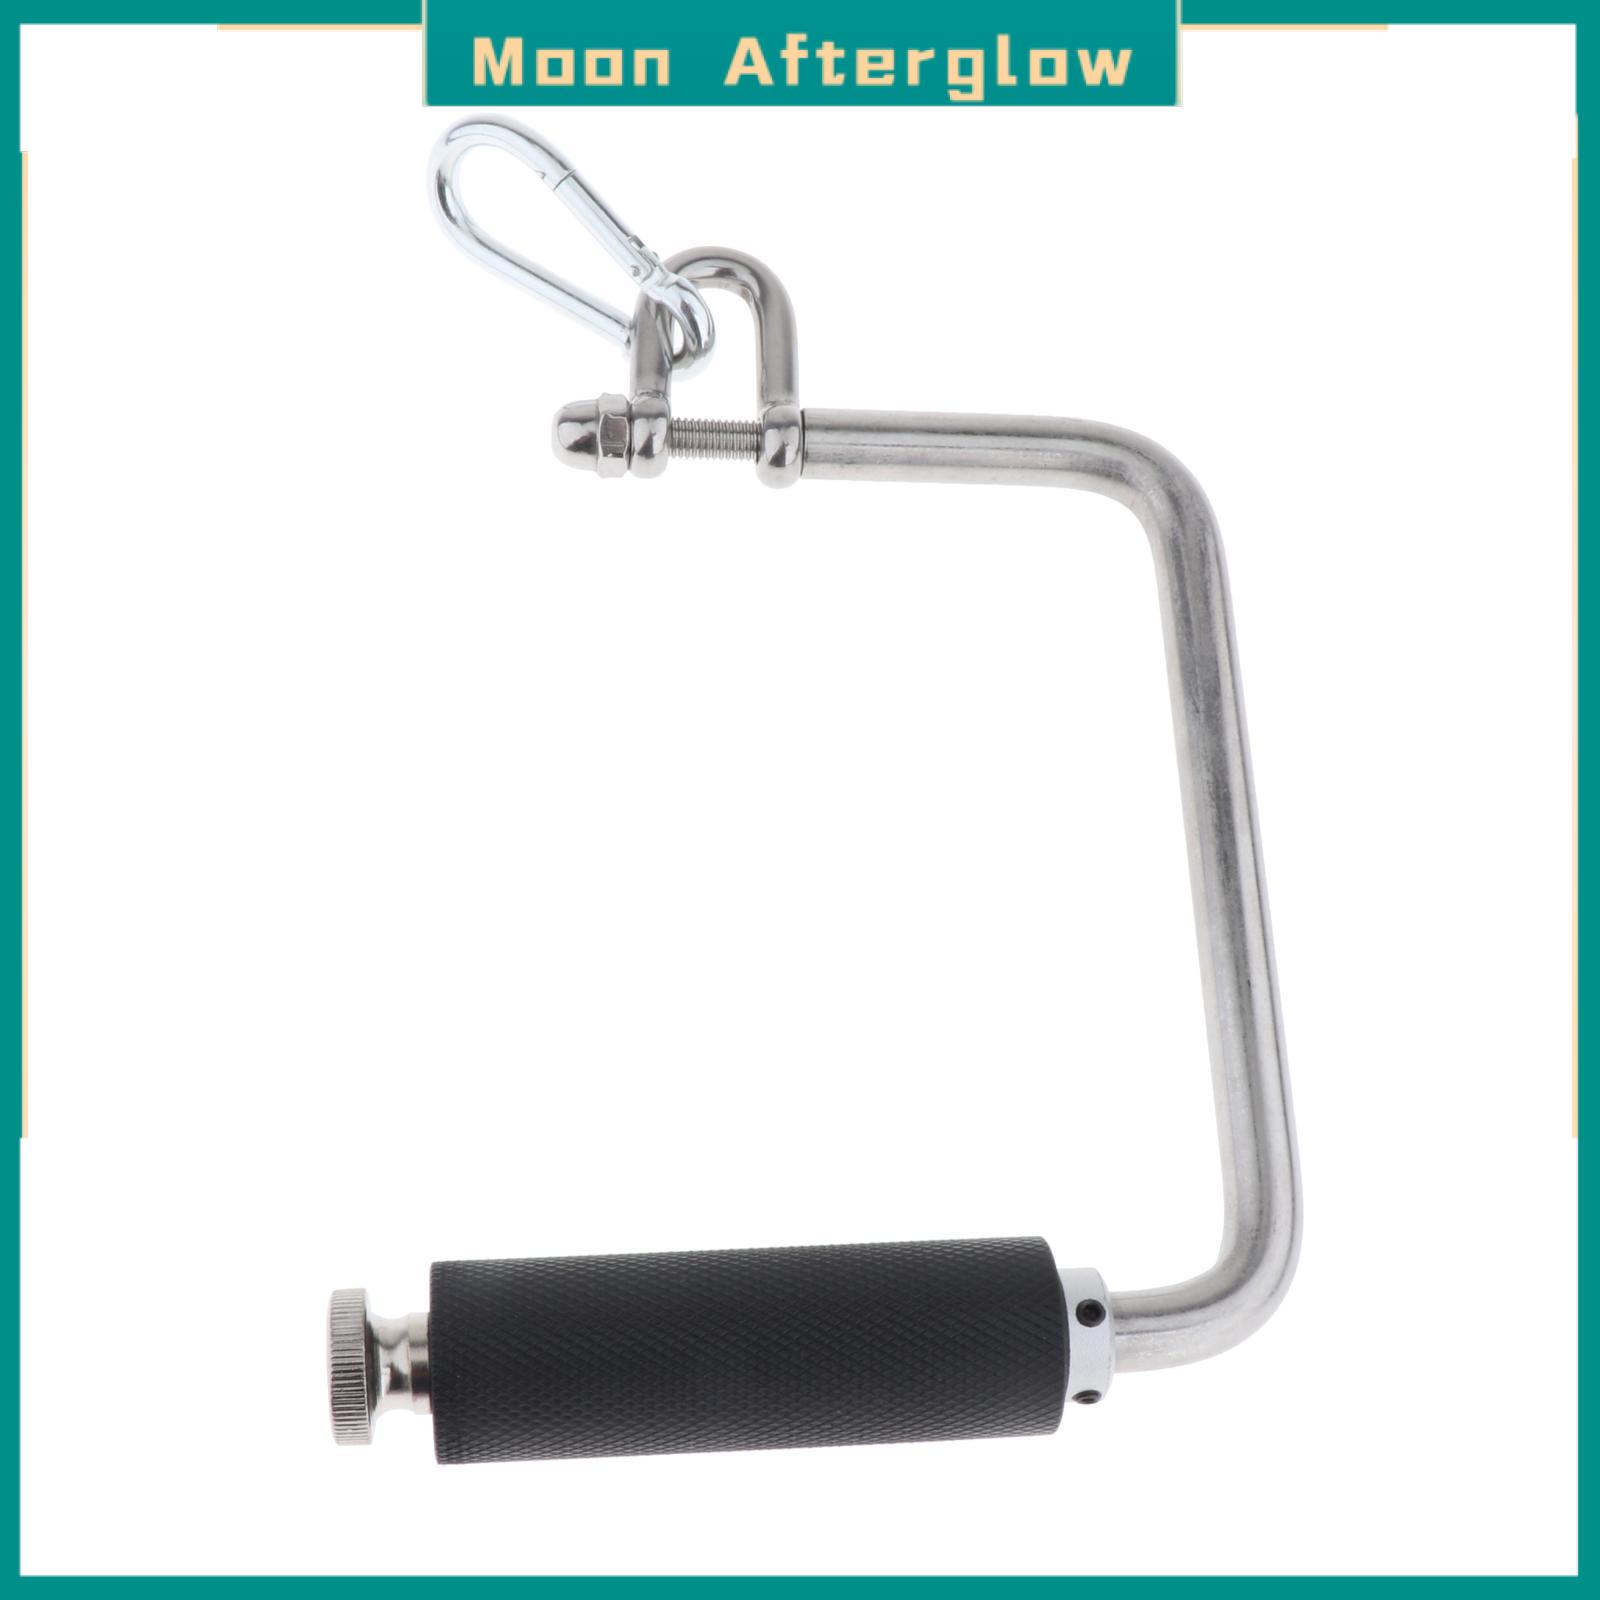 Moon Afterglow Forearm Exerciser Portable Fitness Equipment for Equipment